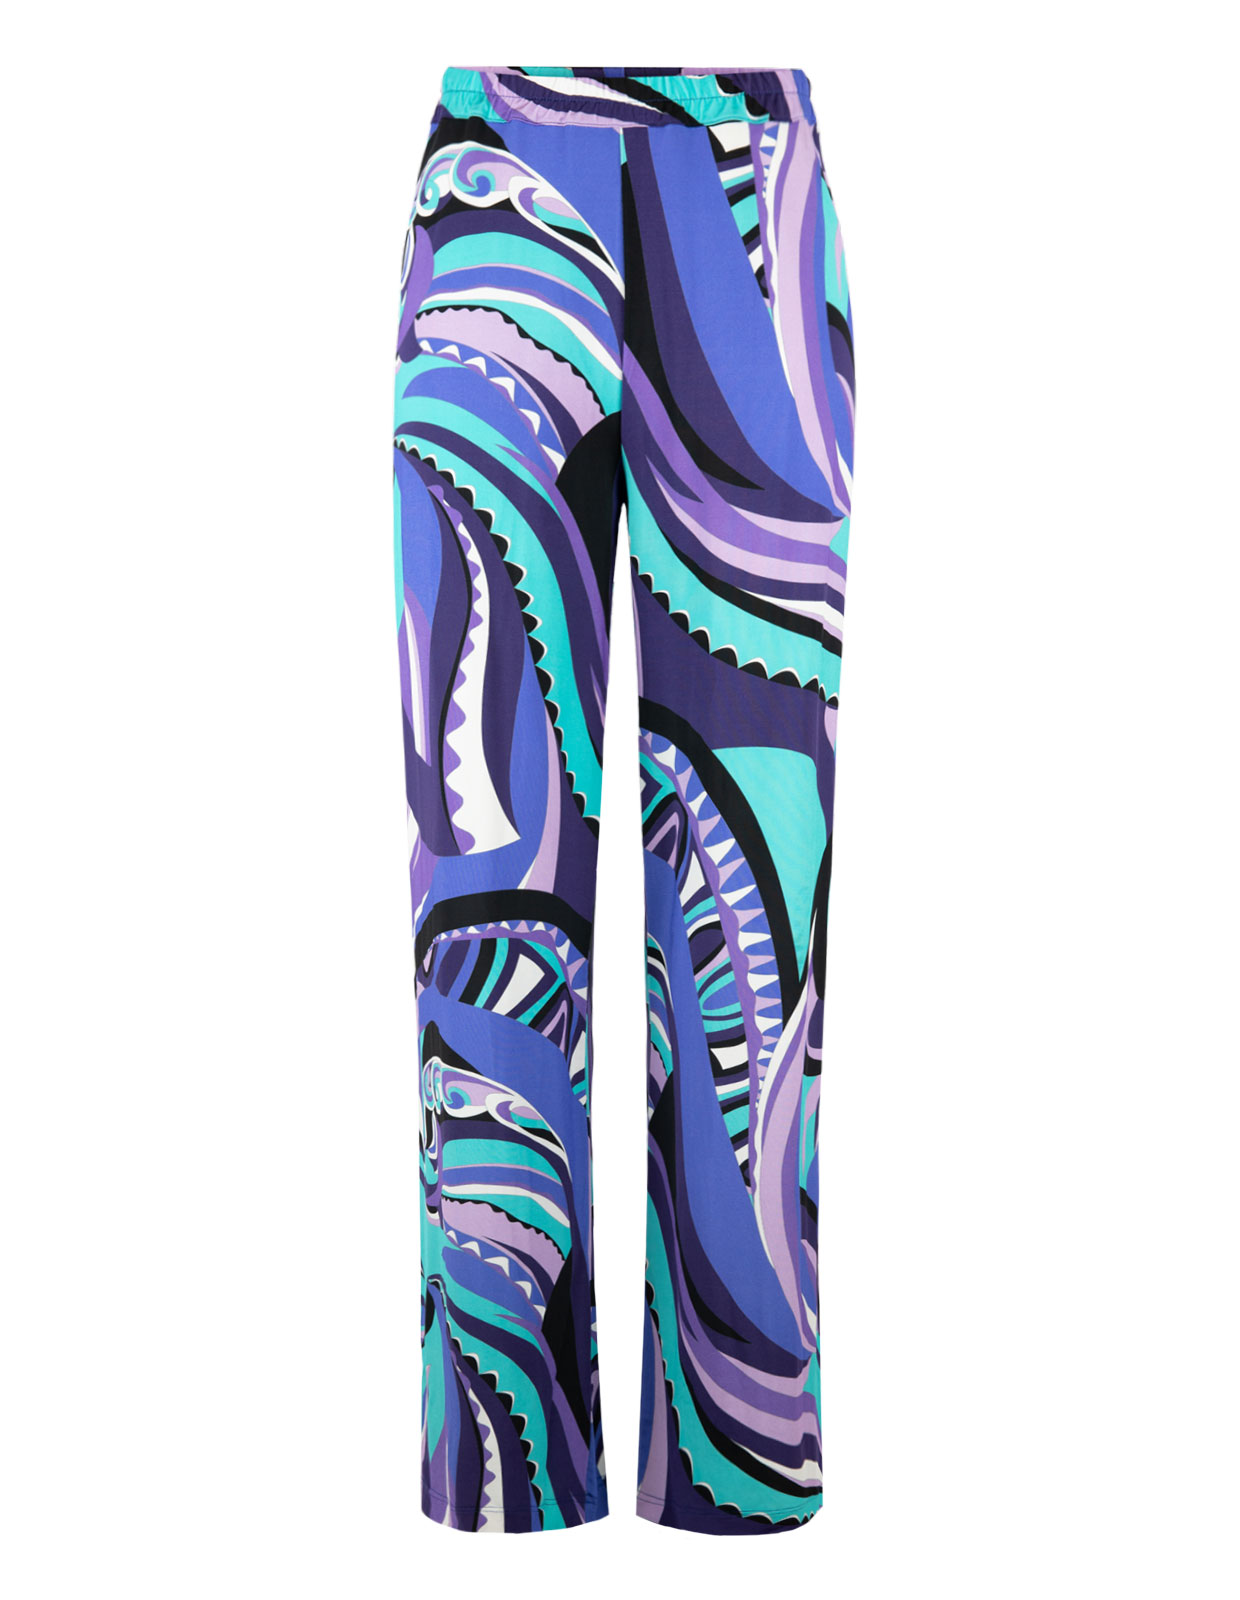 Cleopatra Printed Trousers Retro